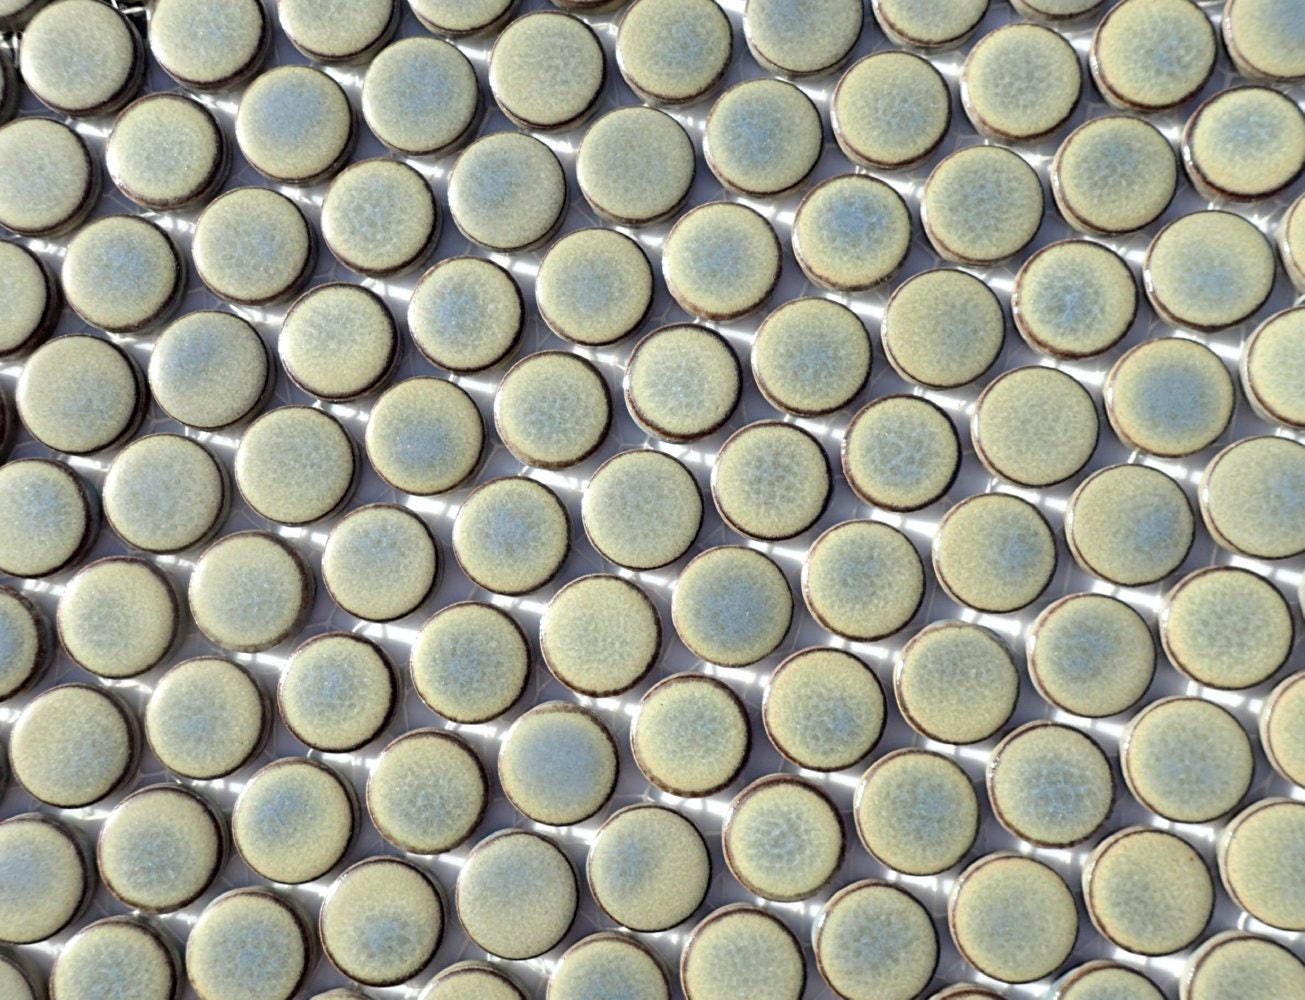 Pewter Gray Ceramic Tiles - Round Mosaic Tiles - 2 cm or .75 inch - 25 Tiles - Penny Rounds